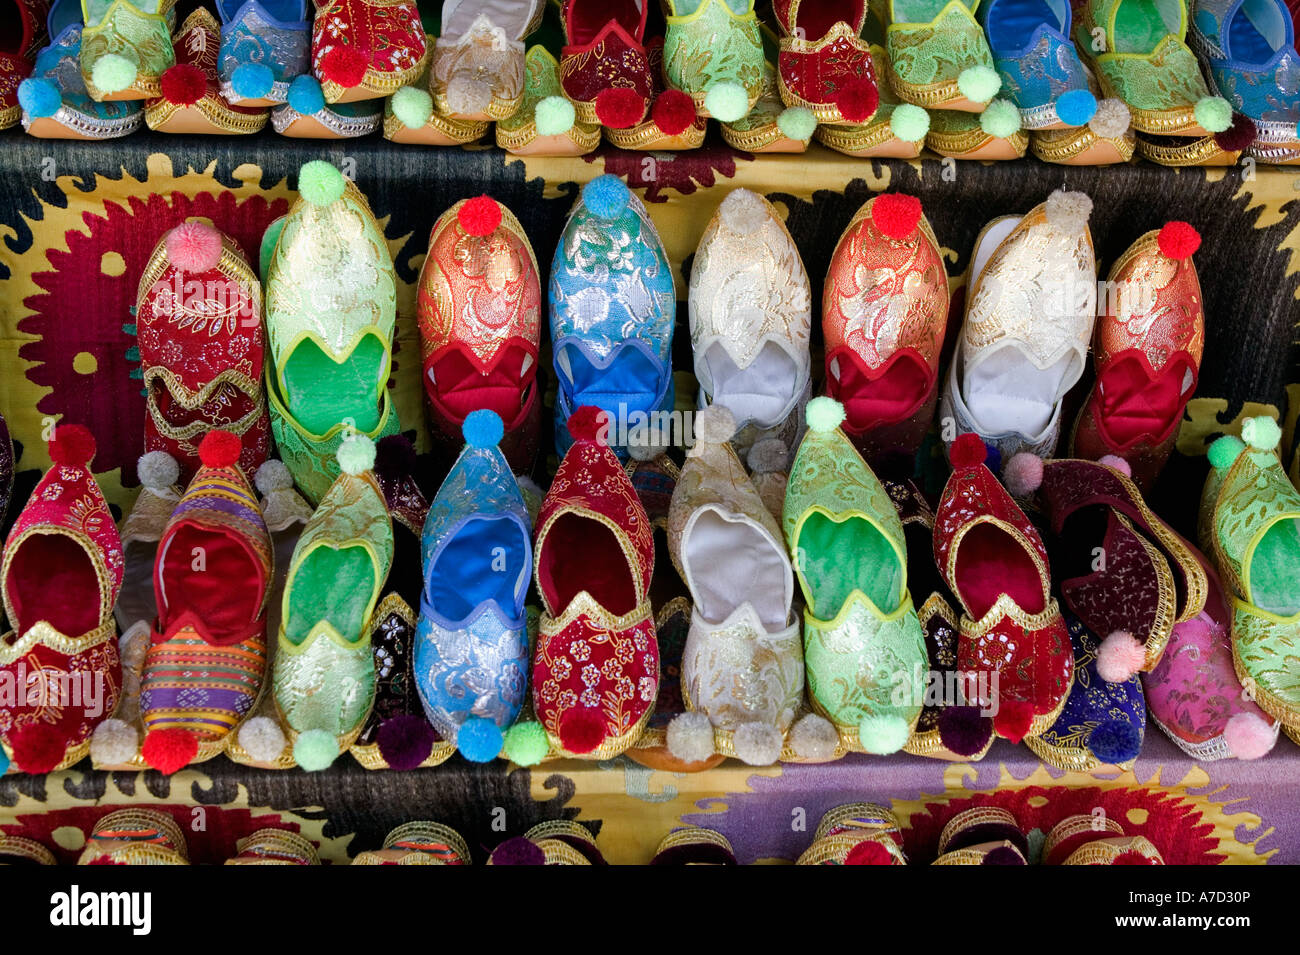 ISTANBUL - MAY 3: Faked Shoes On Sale On The Narrow Street Around Grand  Bazaar On Mal 3, 2015 In Istanbul, Turkey. Area Around Grand Bazaar Is Well  Known Seeling Place For